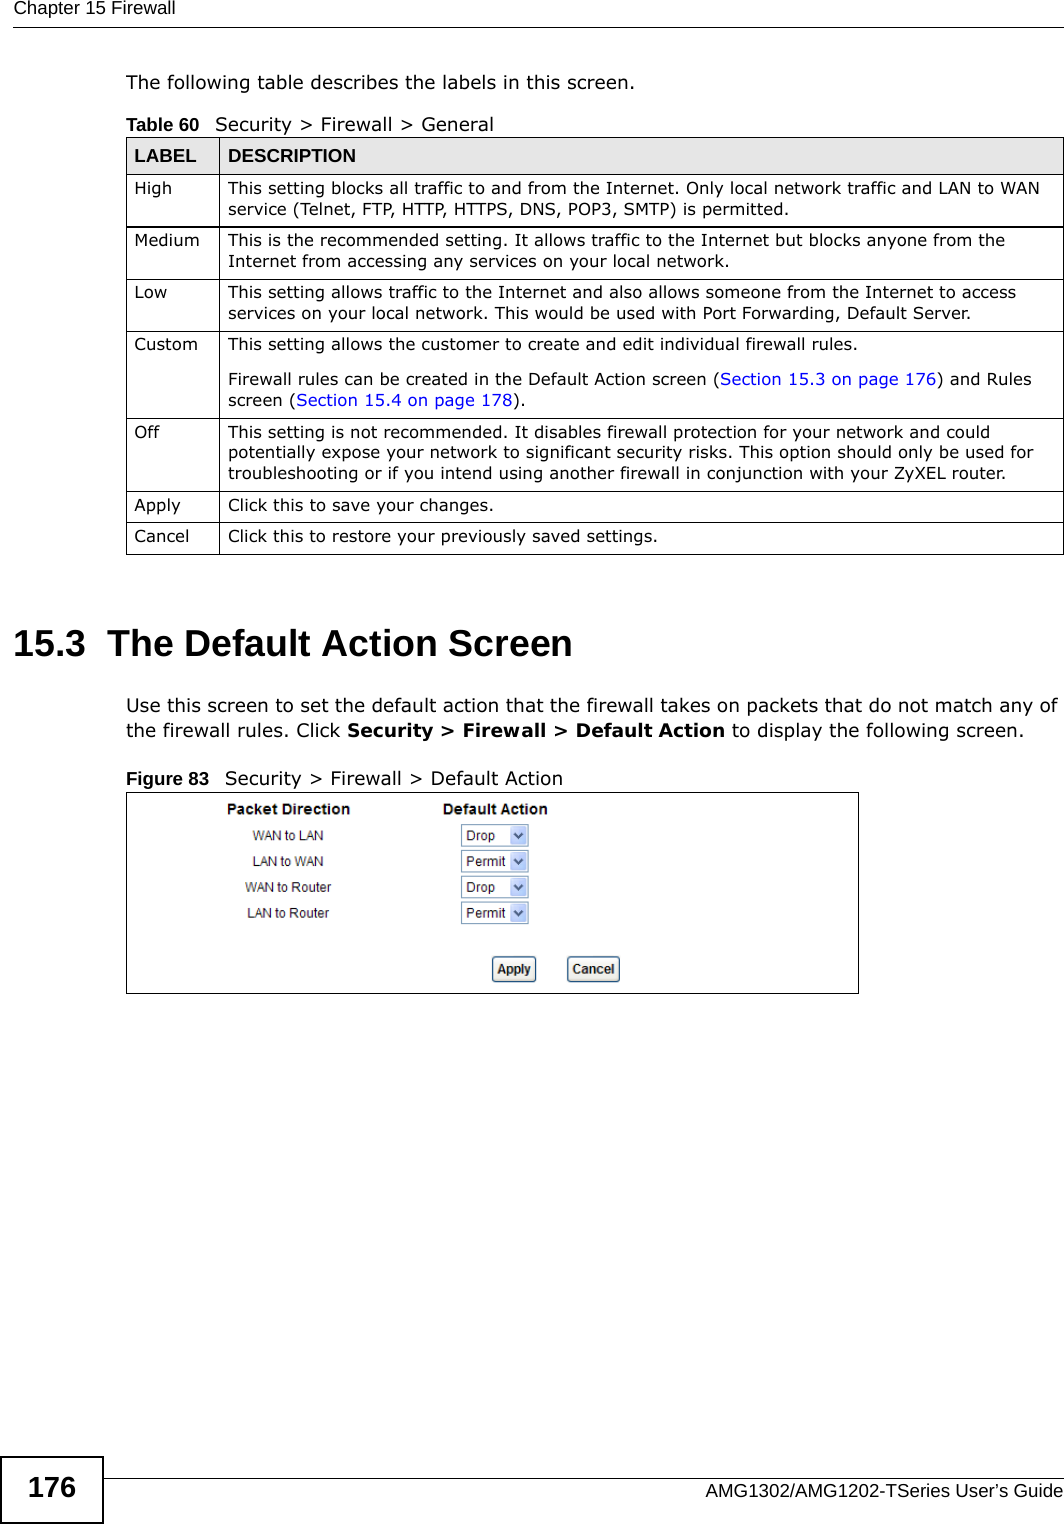 Chapter 15 FirewallAMG1302/AMG1202-TSeries User’s Guide176The following table describes the labels in this screen.15.3  The Default Action ScreenUse this screen to set the default action that the firewall takes on packets that do not match any of the firewall rules. Click Security &gt; Firewall &gt; Default Action to display the following screen.Figure 83   Security &gt; Firewall &gt; Default Action Table 60   Security &gt; Firewall &gt; GeneralLABEL DESCRIPTIONHigh This setting blocks all traffic to and from the Internet. Only local network traffic and LAN to WAN service (Telnet, FTP, HTTP, HTTPS, DNS, POP3, SMTP) is permitted. Medium This is the recommended setting. It allows traffic to the Internet but blocks anyone from the Internet from accessing any services on your local network. Low This setting allows traffic to the Internet and also allows someone from the Internet to access services on your local network. This would be used with Port Forwarding, Default Server. Custom This setting allows the customer to create and edit individual firewall rules. Firewall rules can be created in the Default Action screen (Section 15.3 on page 176) and Rules screen (Section 15.4 on page 178).Off This setting is not recommended. It disables firewall protection for your network and could potentially expose your network to significant security risks. This option should only be used for troubleshooting or if you intend using another firewall in conjunction with your ZyXEL router.Apply Click this to save your changes.Cancel Click this to restore your previously saved settings.